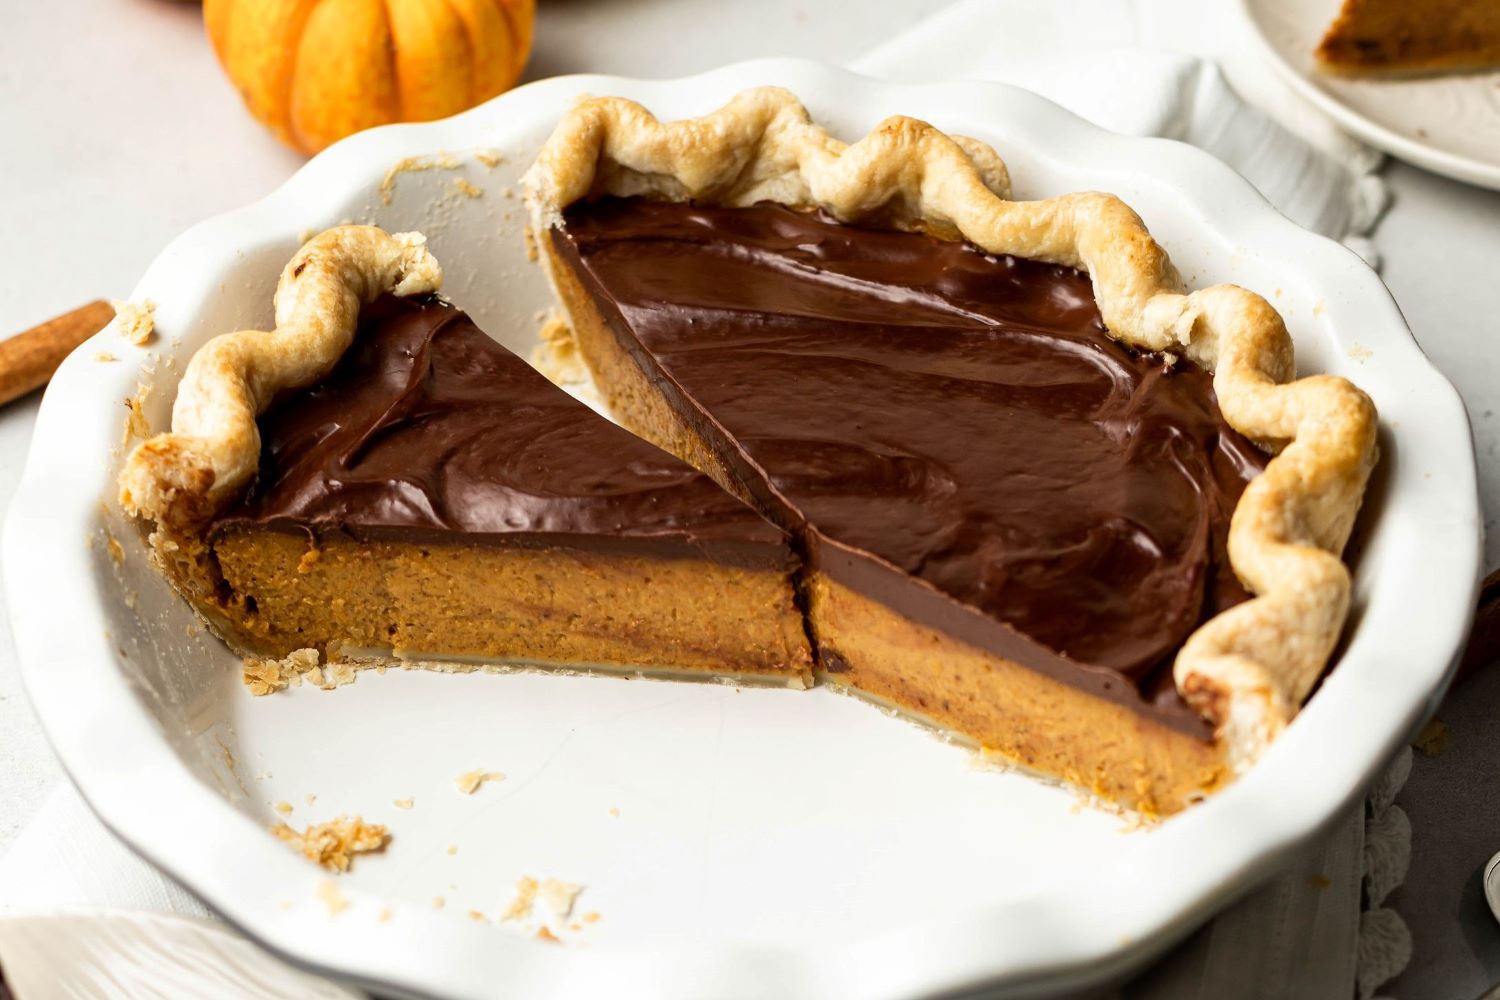 pie recipes for thanksgiving, pumpkin pie with chocolate